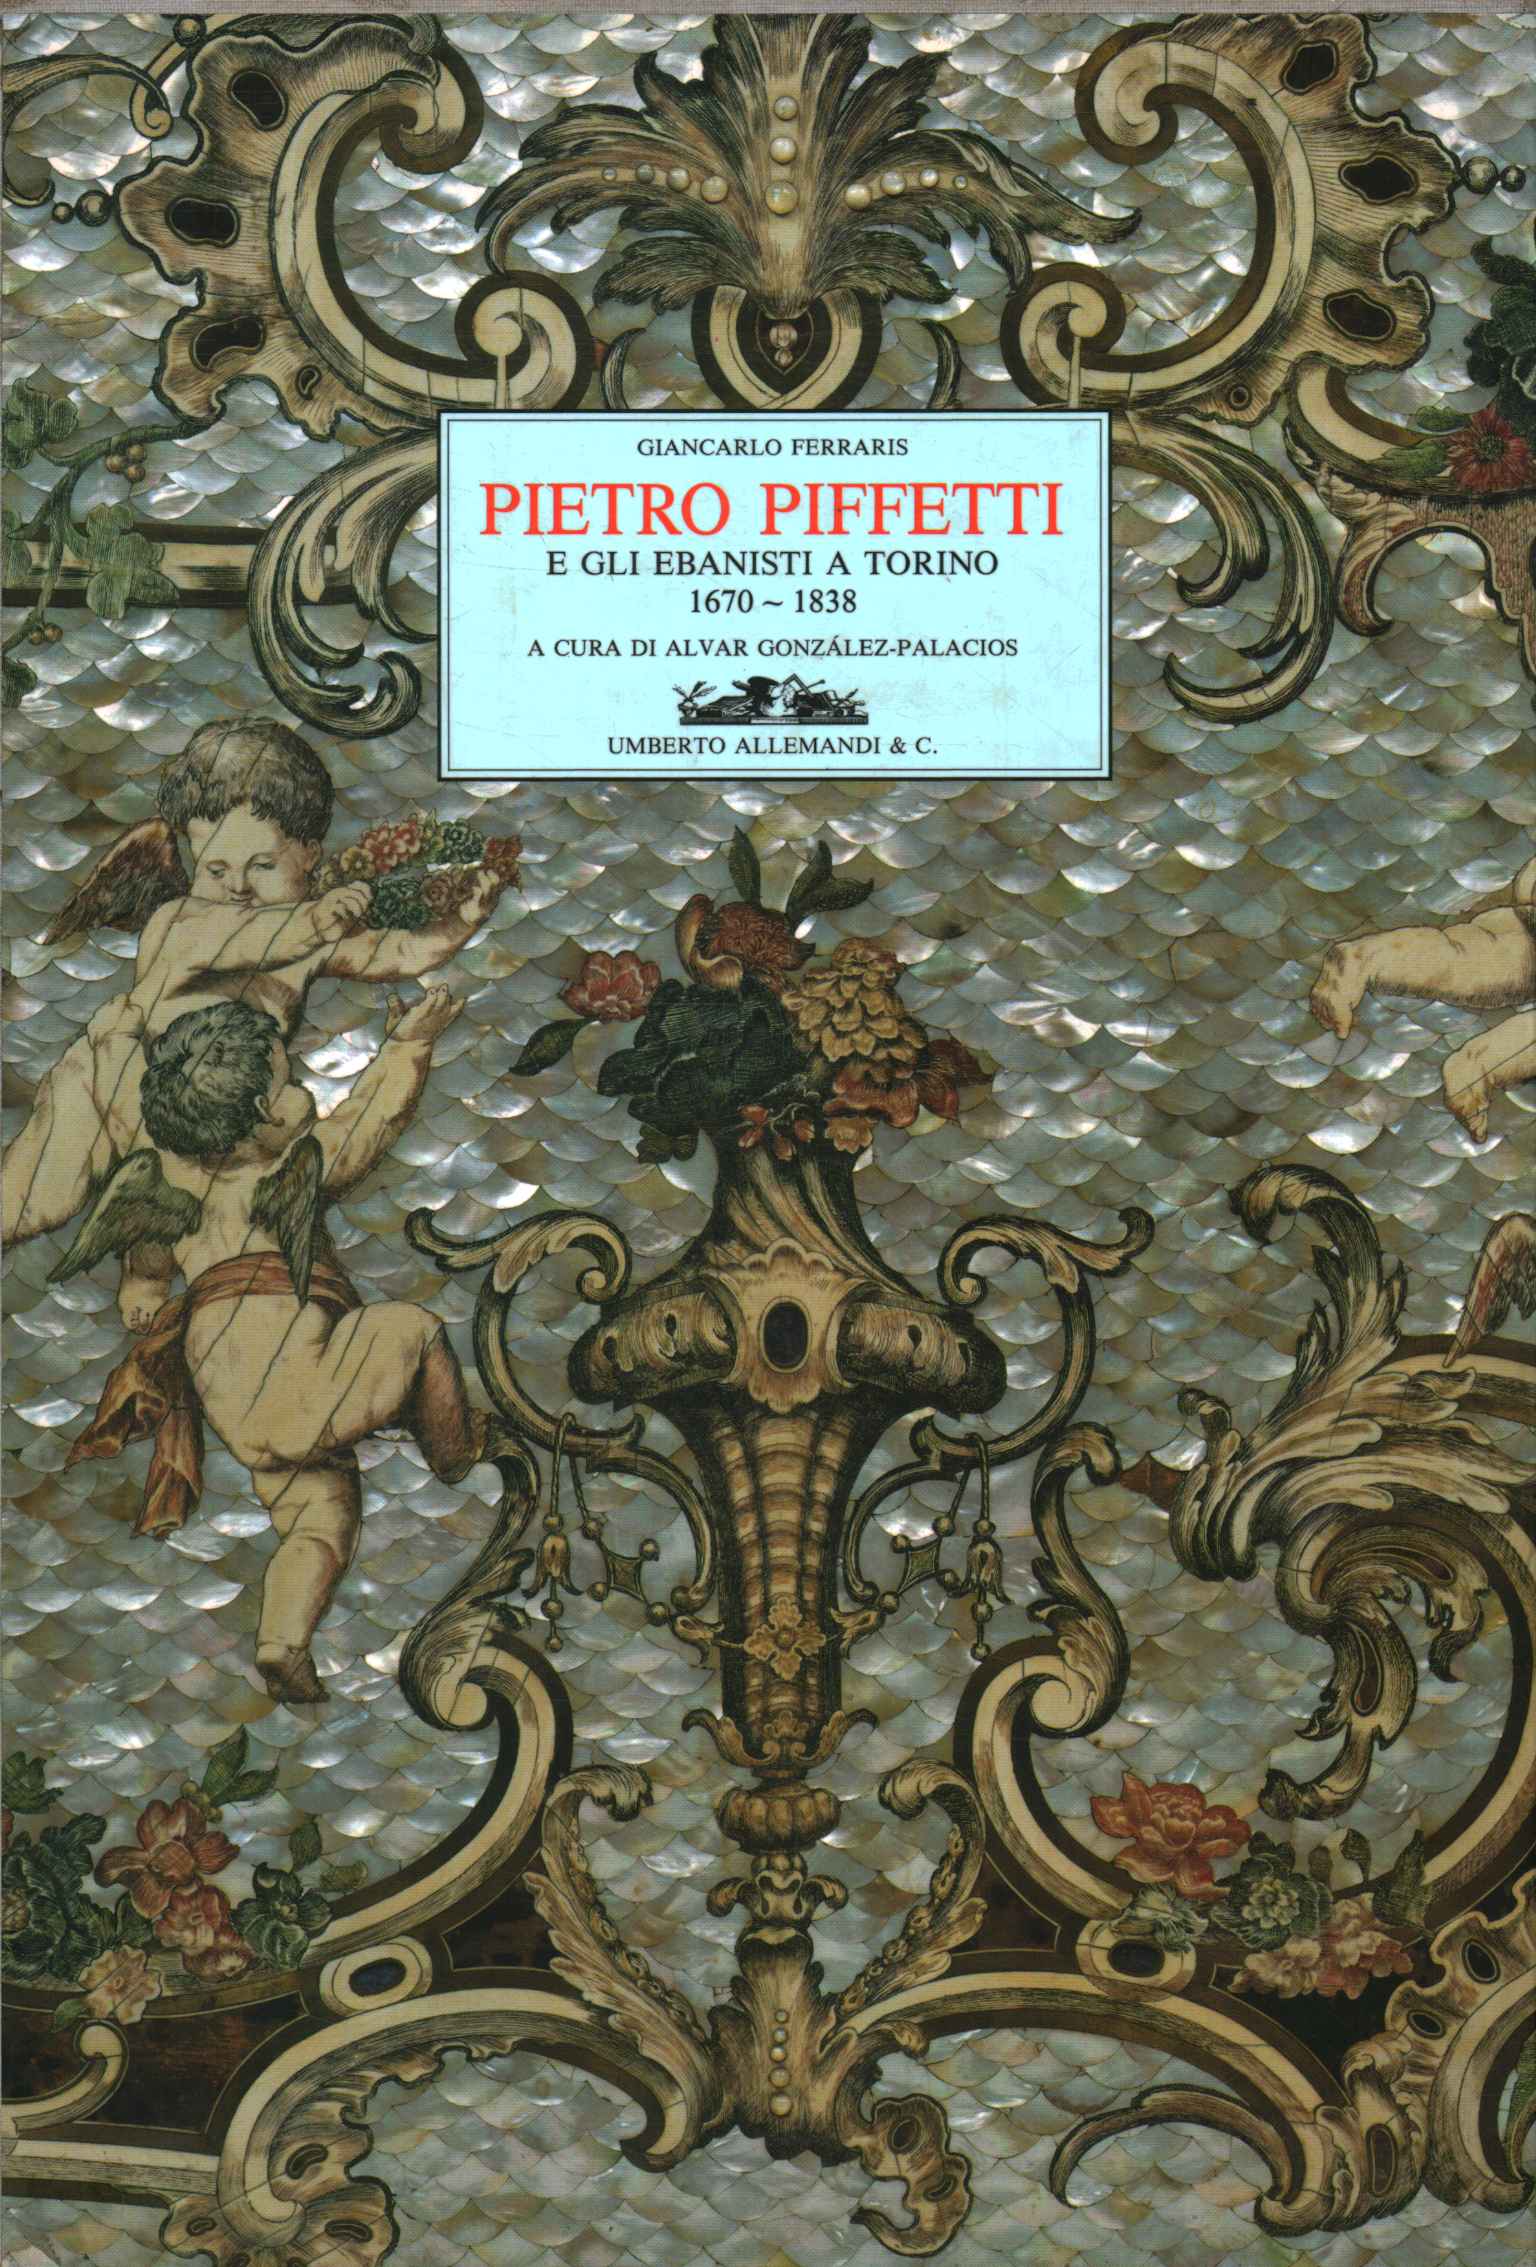 Pietro Piffetti and the cabinetmakers in Turin